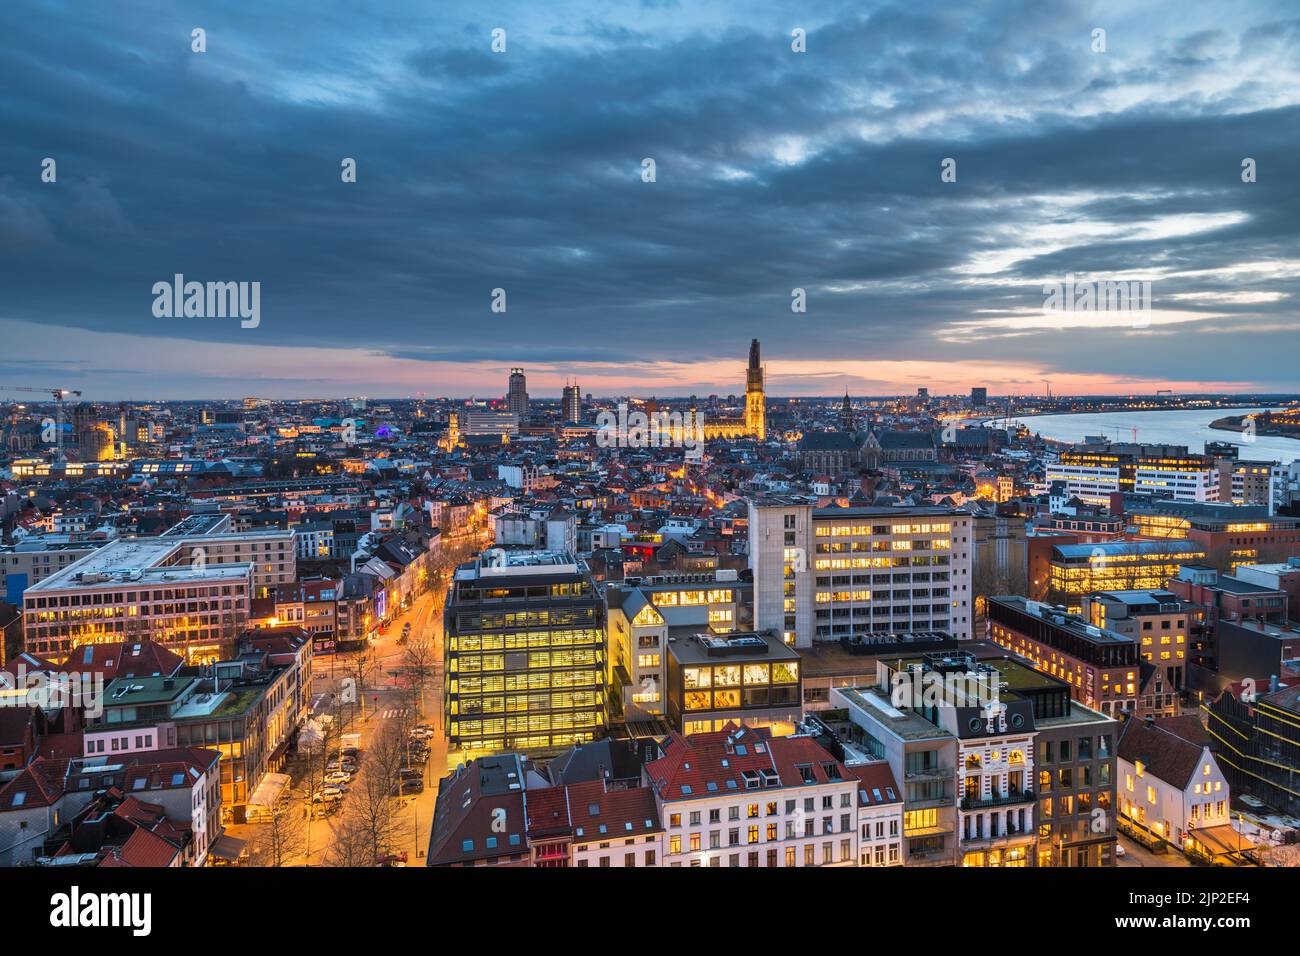 Antwerp, Belgium cityscape from above at twilight. Stock Photo